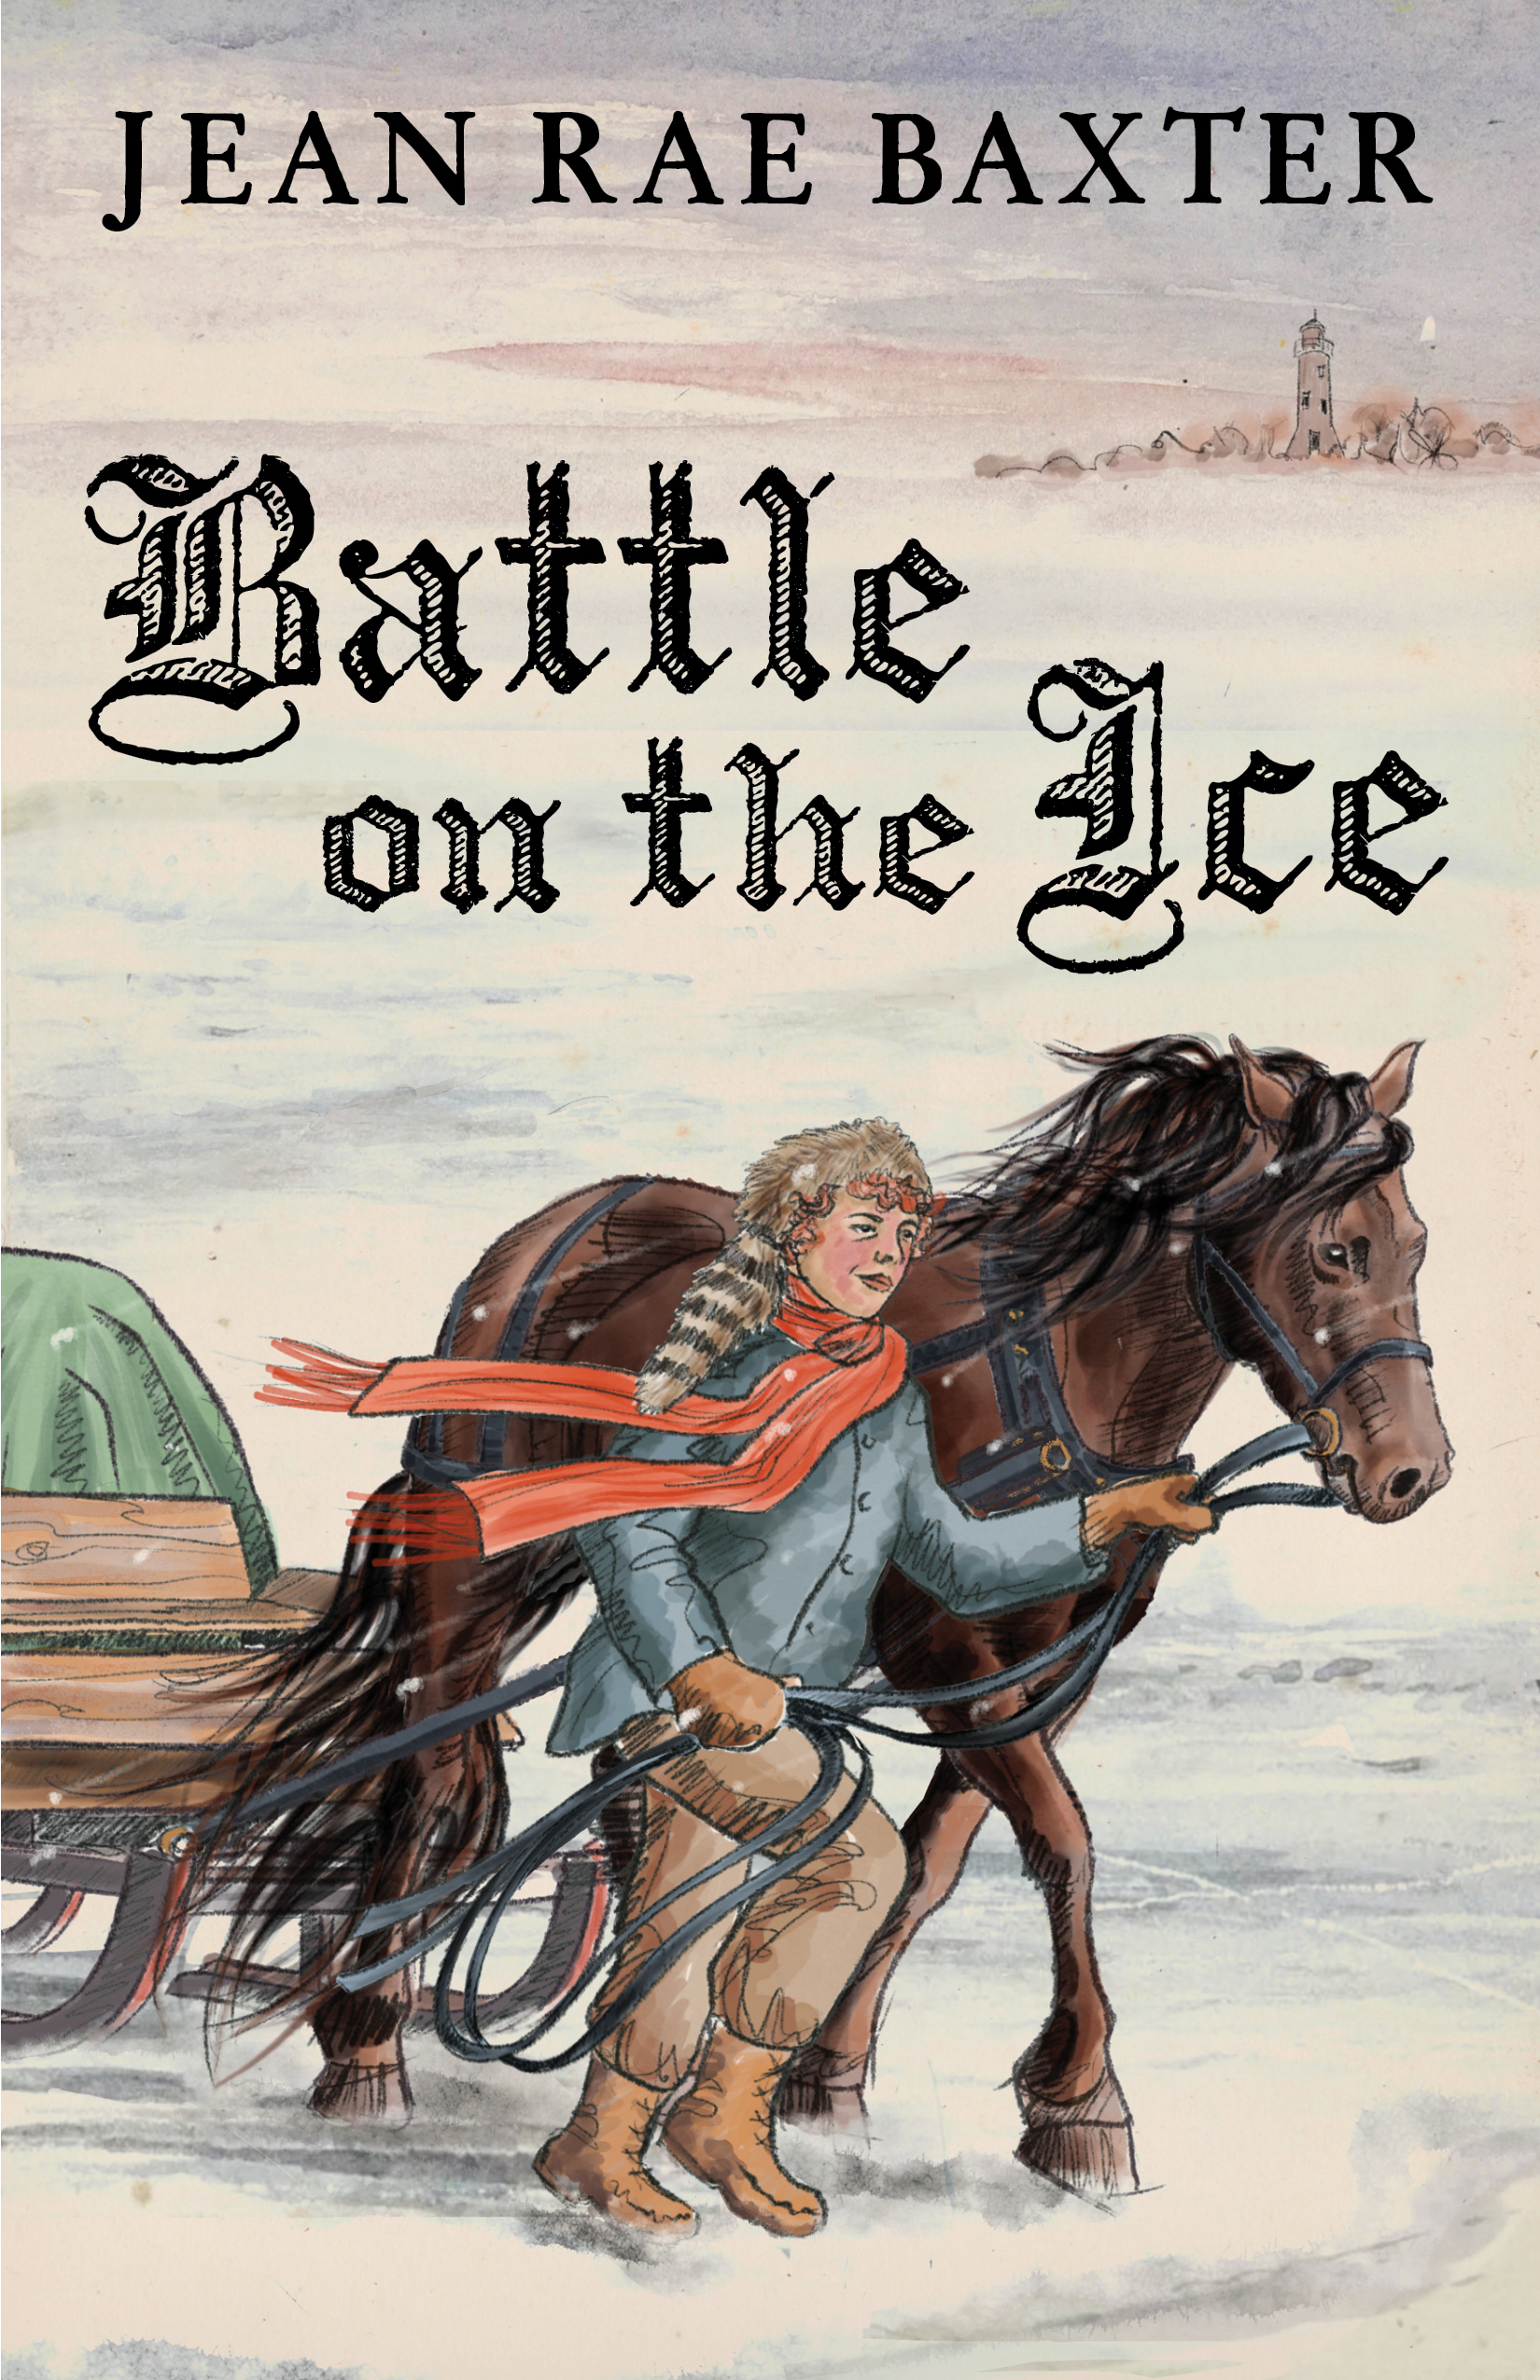 Readings, signings and lectures in Leamington, Kingsville, Wheatley, Harrow and Amherstburg--all places where the action of Battle on the Ice is local history.